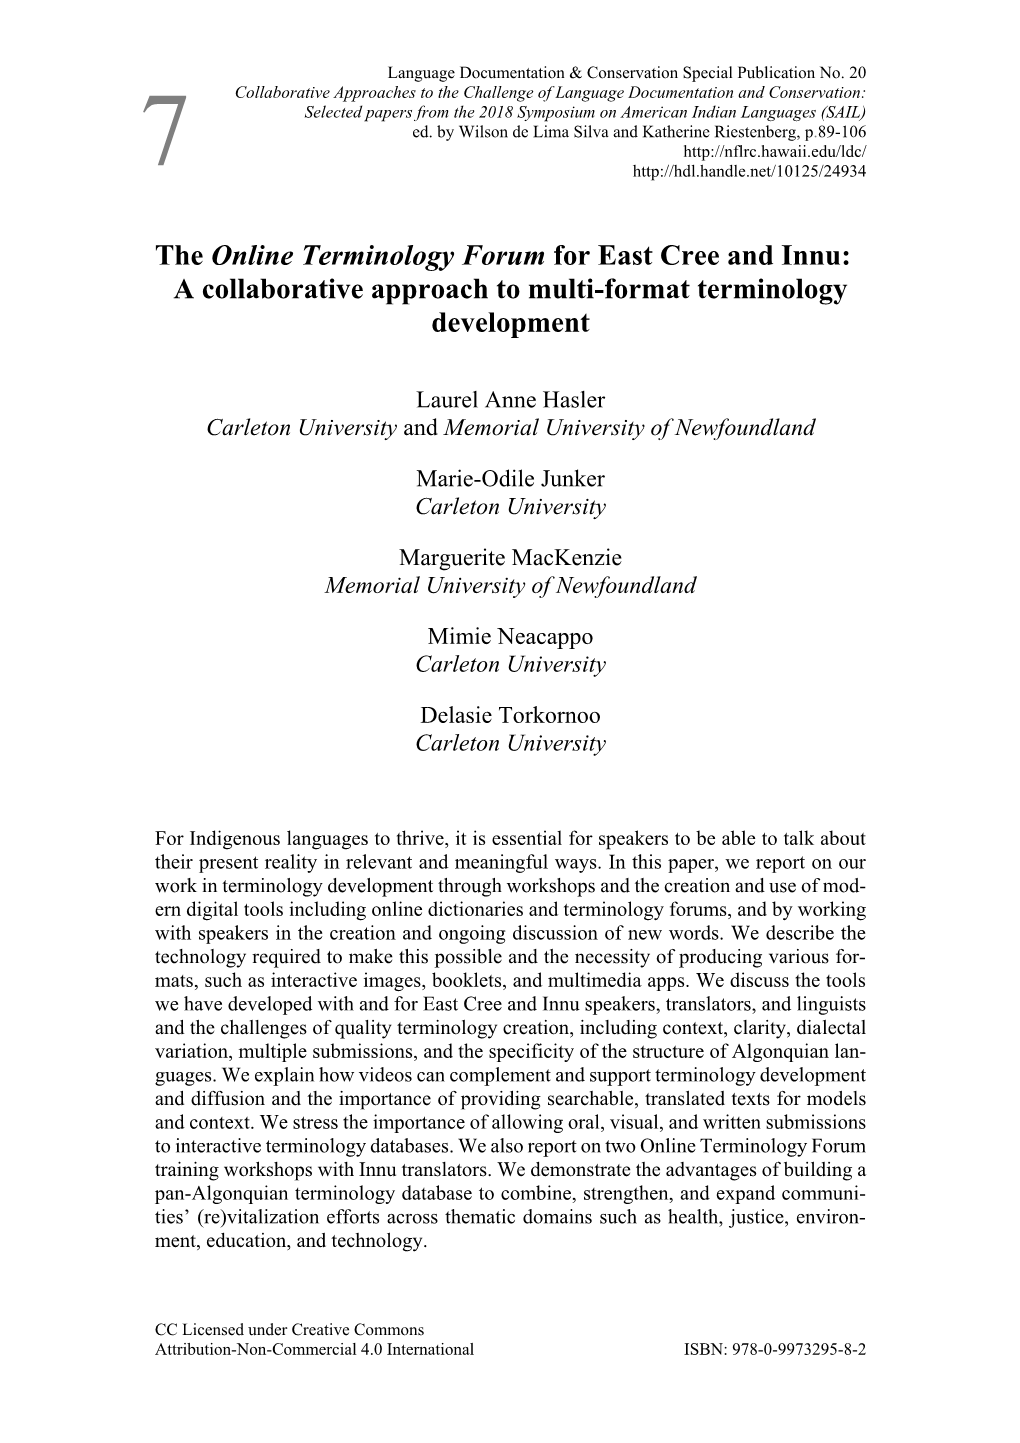 The Online Terminology Forum for East Cree and Innu: a Collaborative Approach to Multi-Format Terminology Development